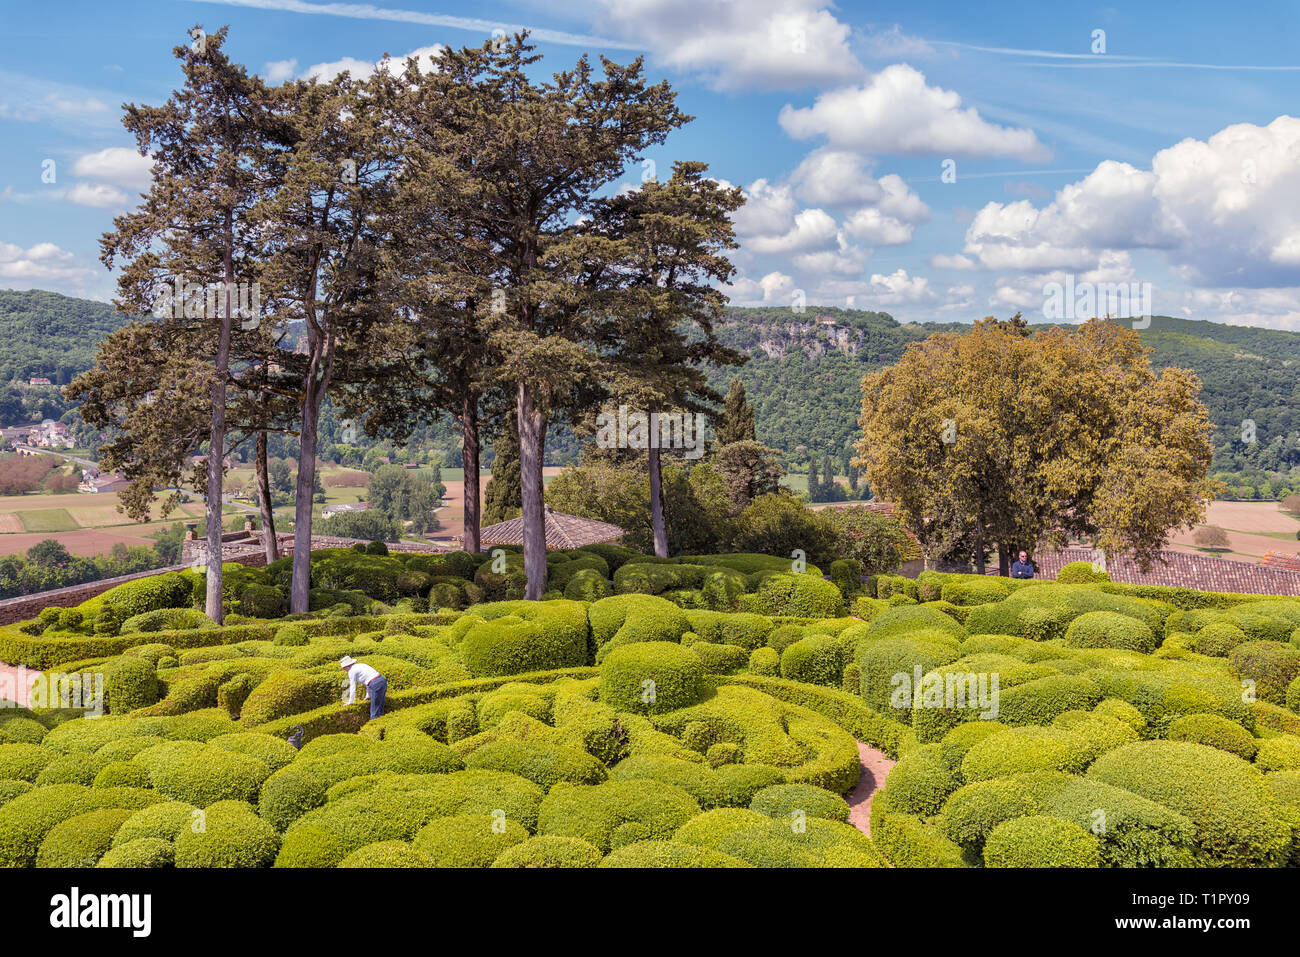 The Marqueyssac Gardens are located next to the Château de Marqueyssac, Dordogne, France. They are high up on a cliff top above the Dordogne Valley. Stock Photo